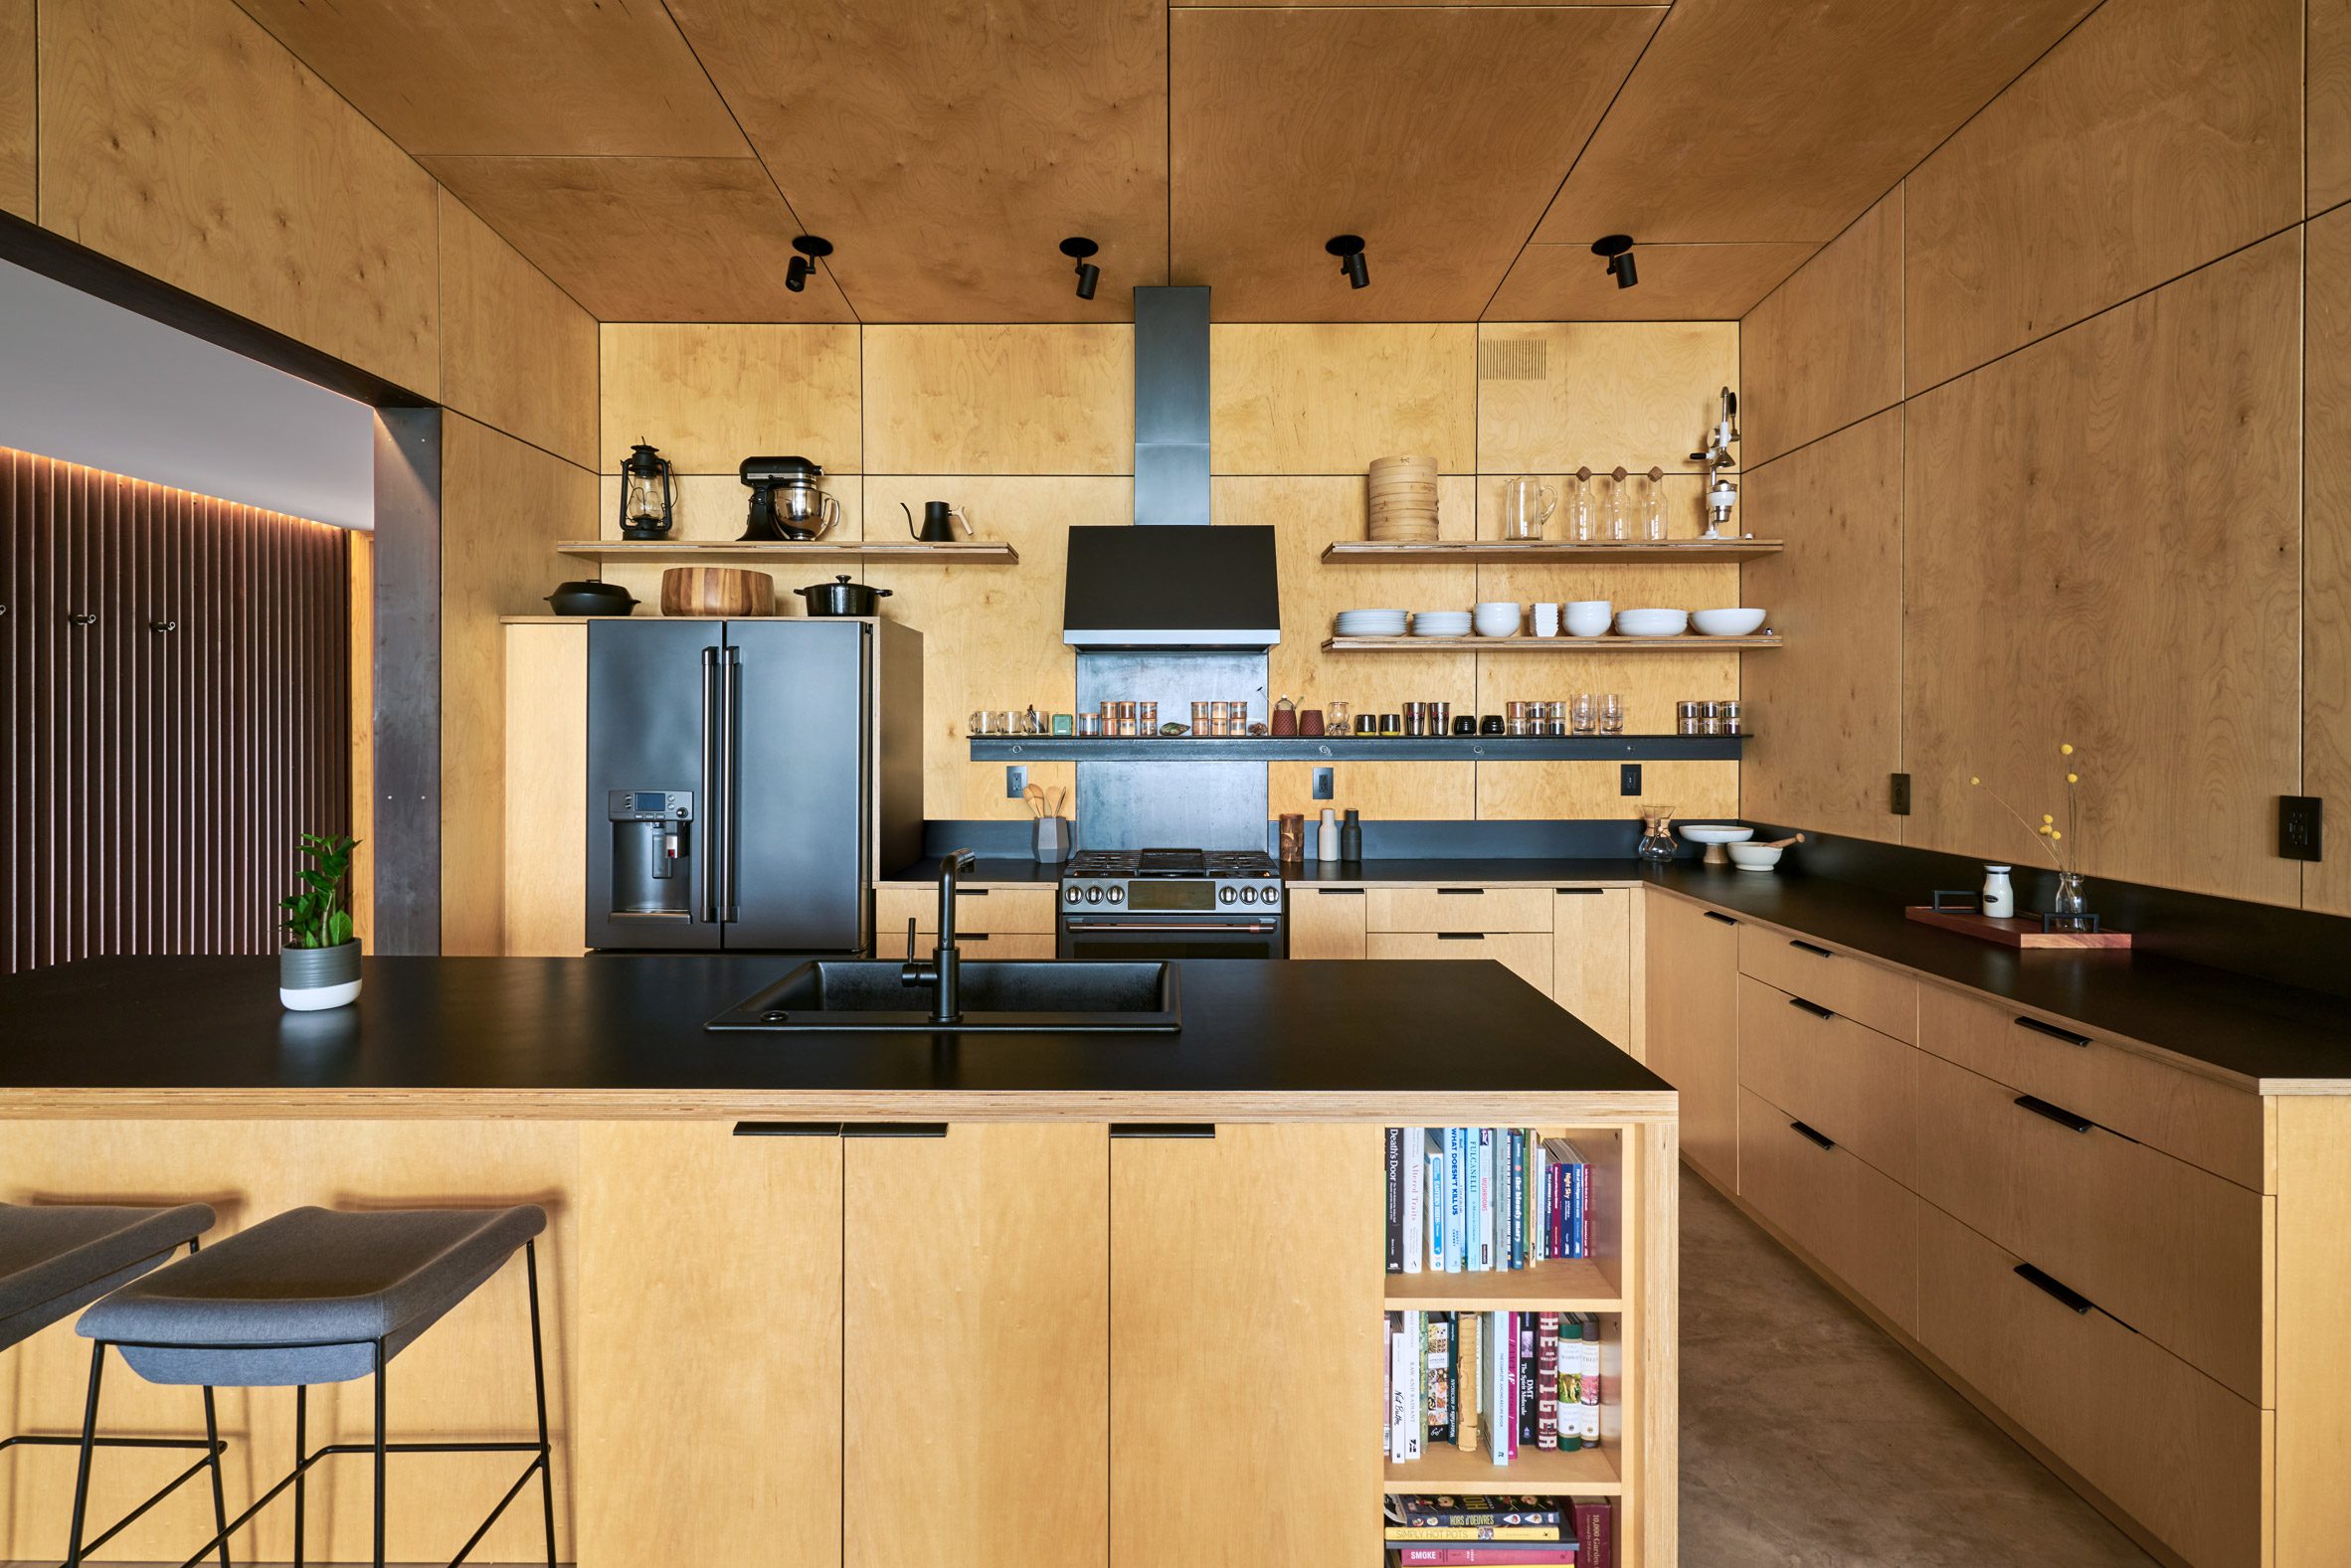 A kitchen made of light wood panelings